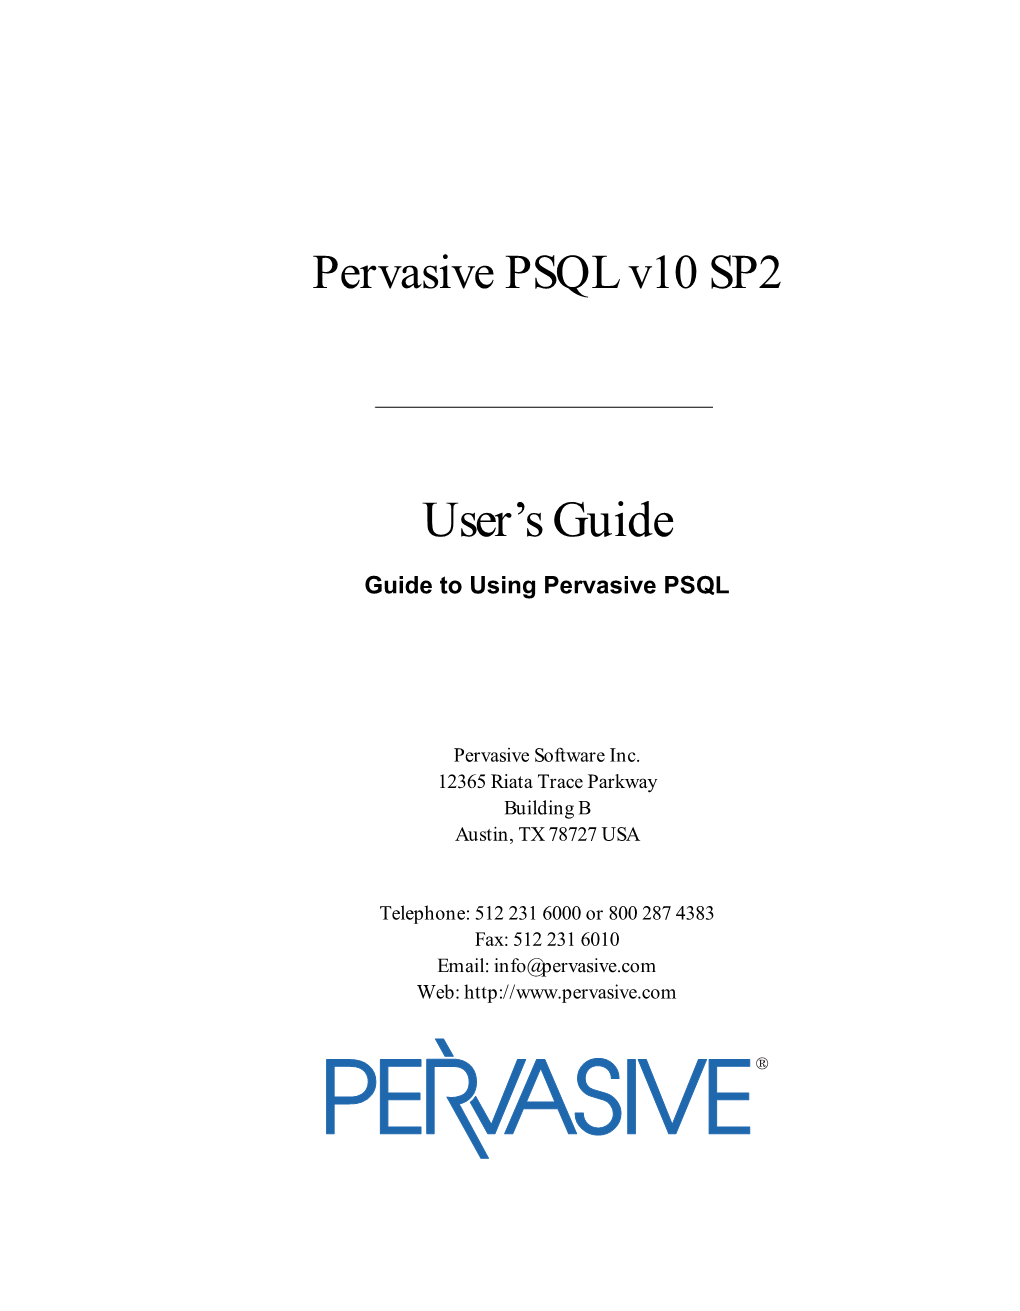 User's Guide Introduces Pervasive PSQL and Describes Common User Tasks